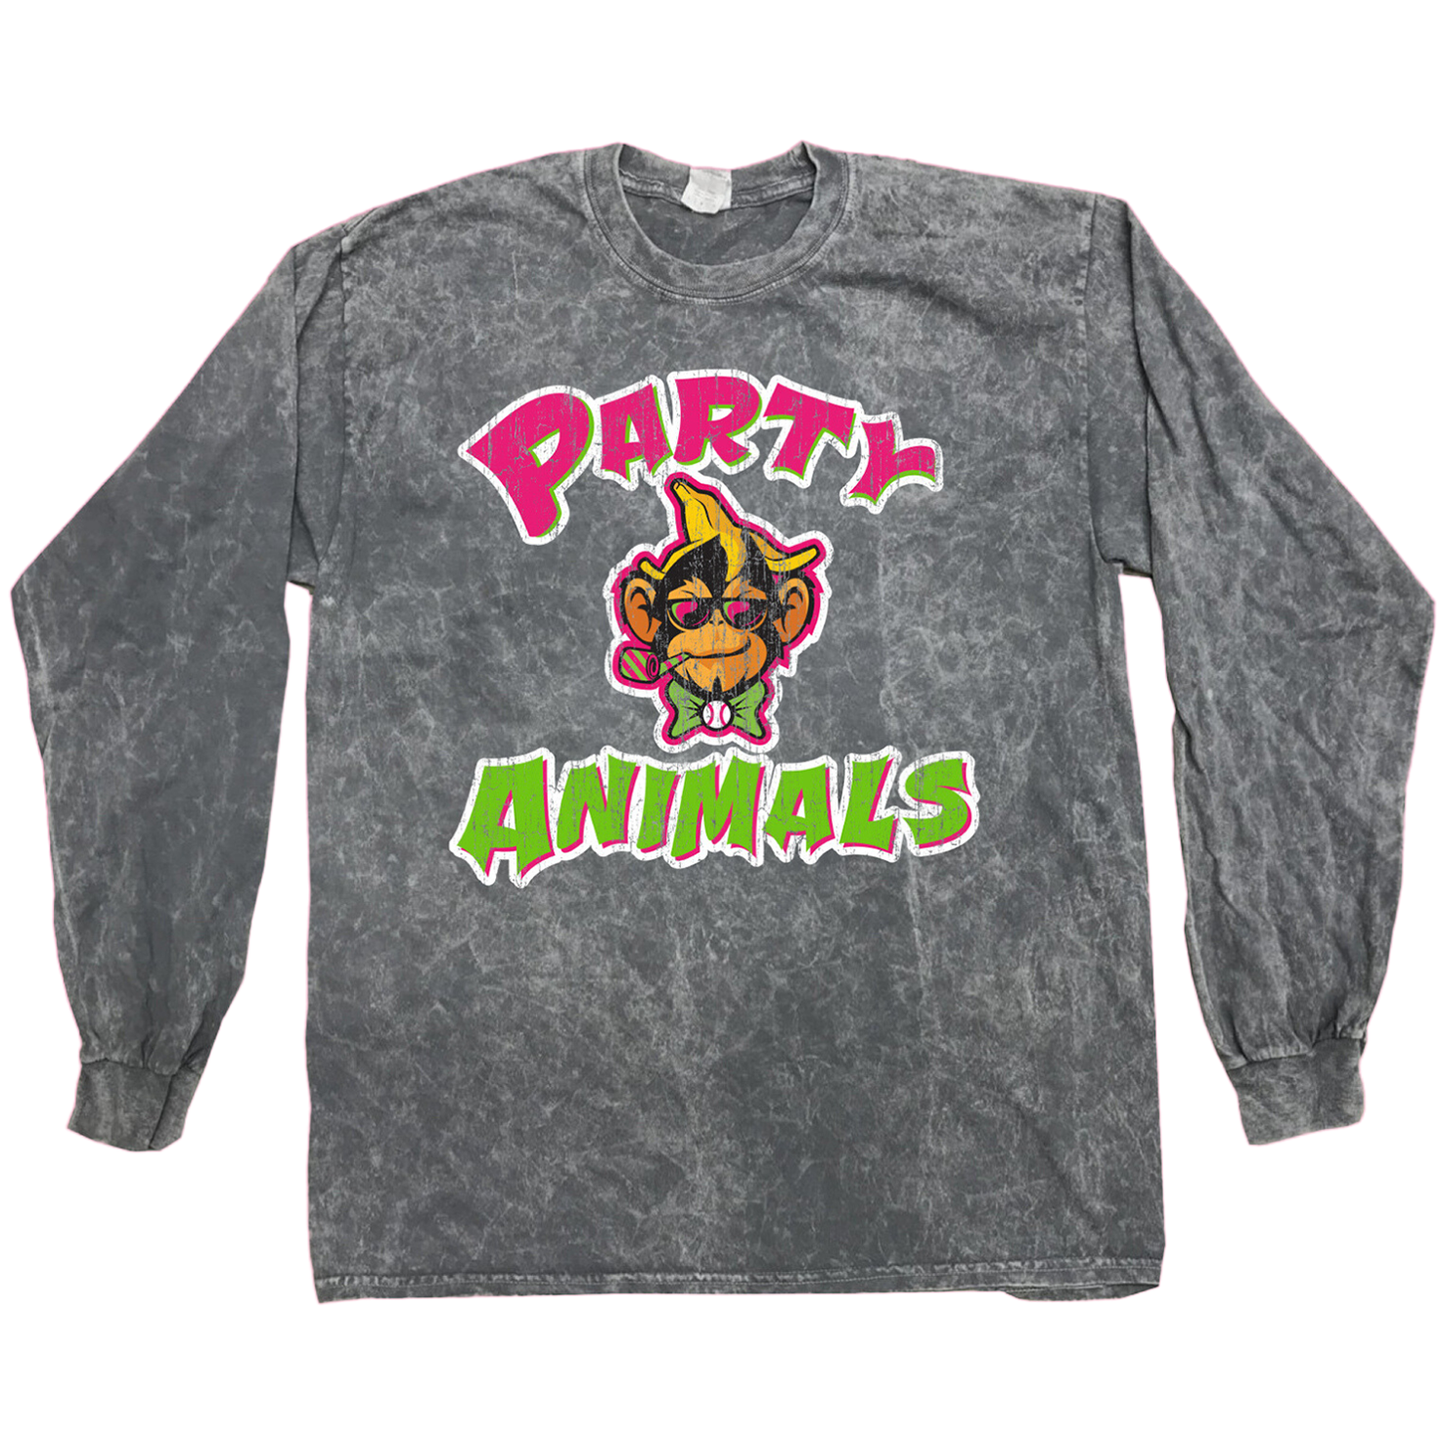 Party Animals Long Sleeve Tee - Mineral Wash